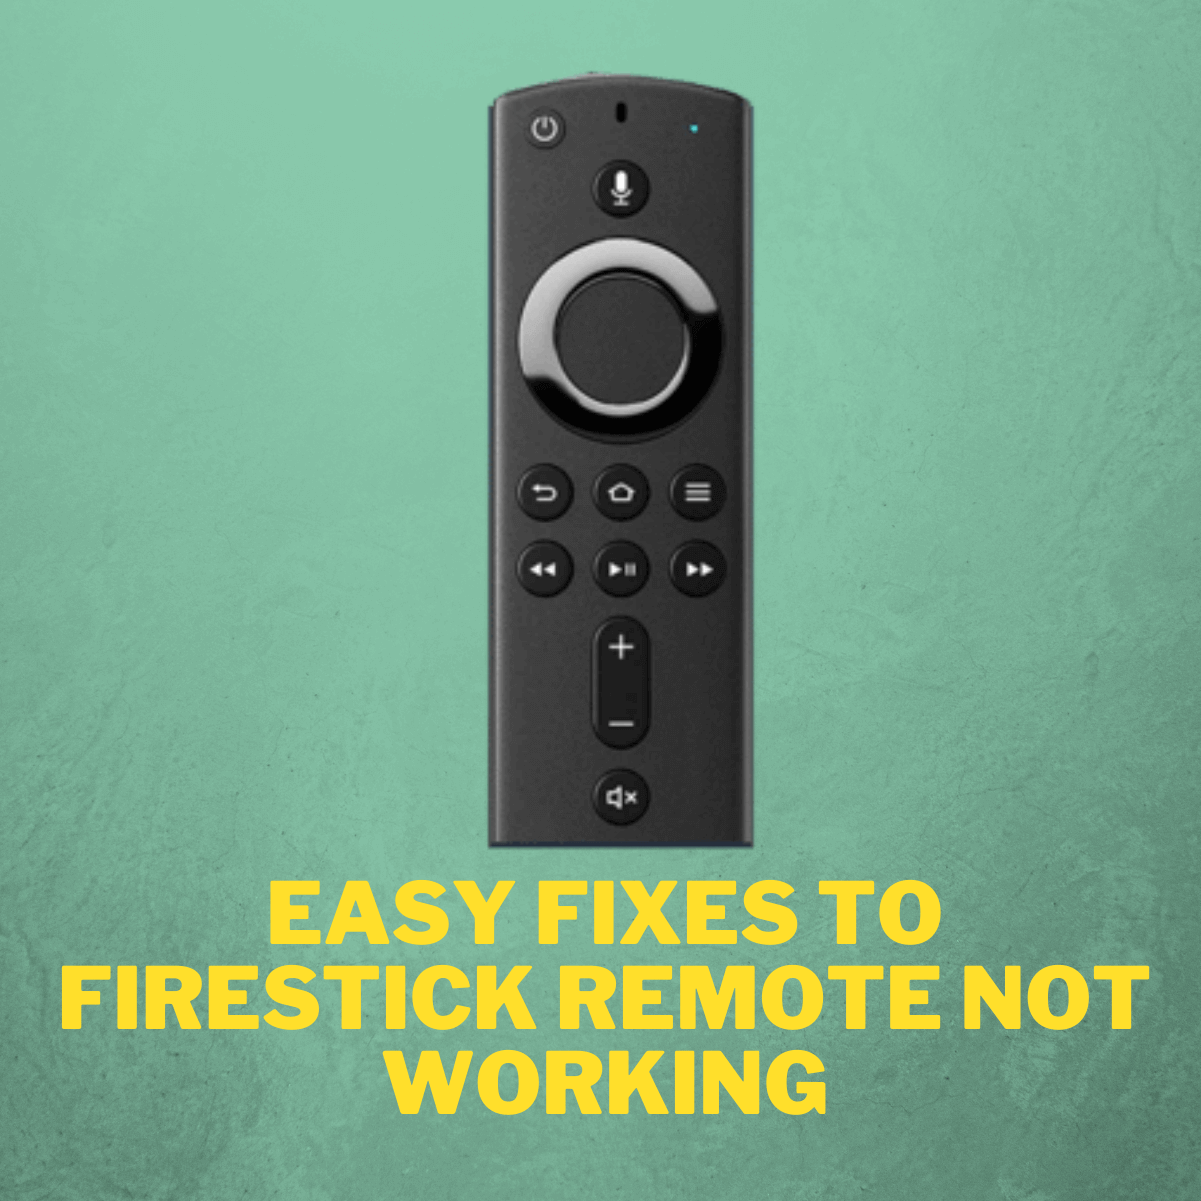 7 Easy Fixes To Firestick Not Working Problems March 2021